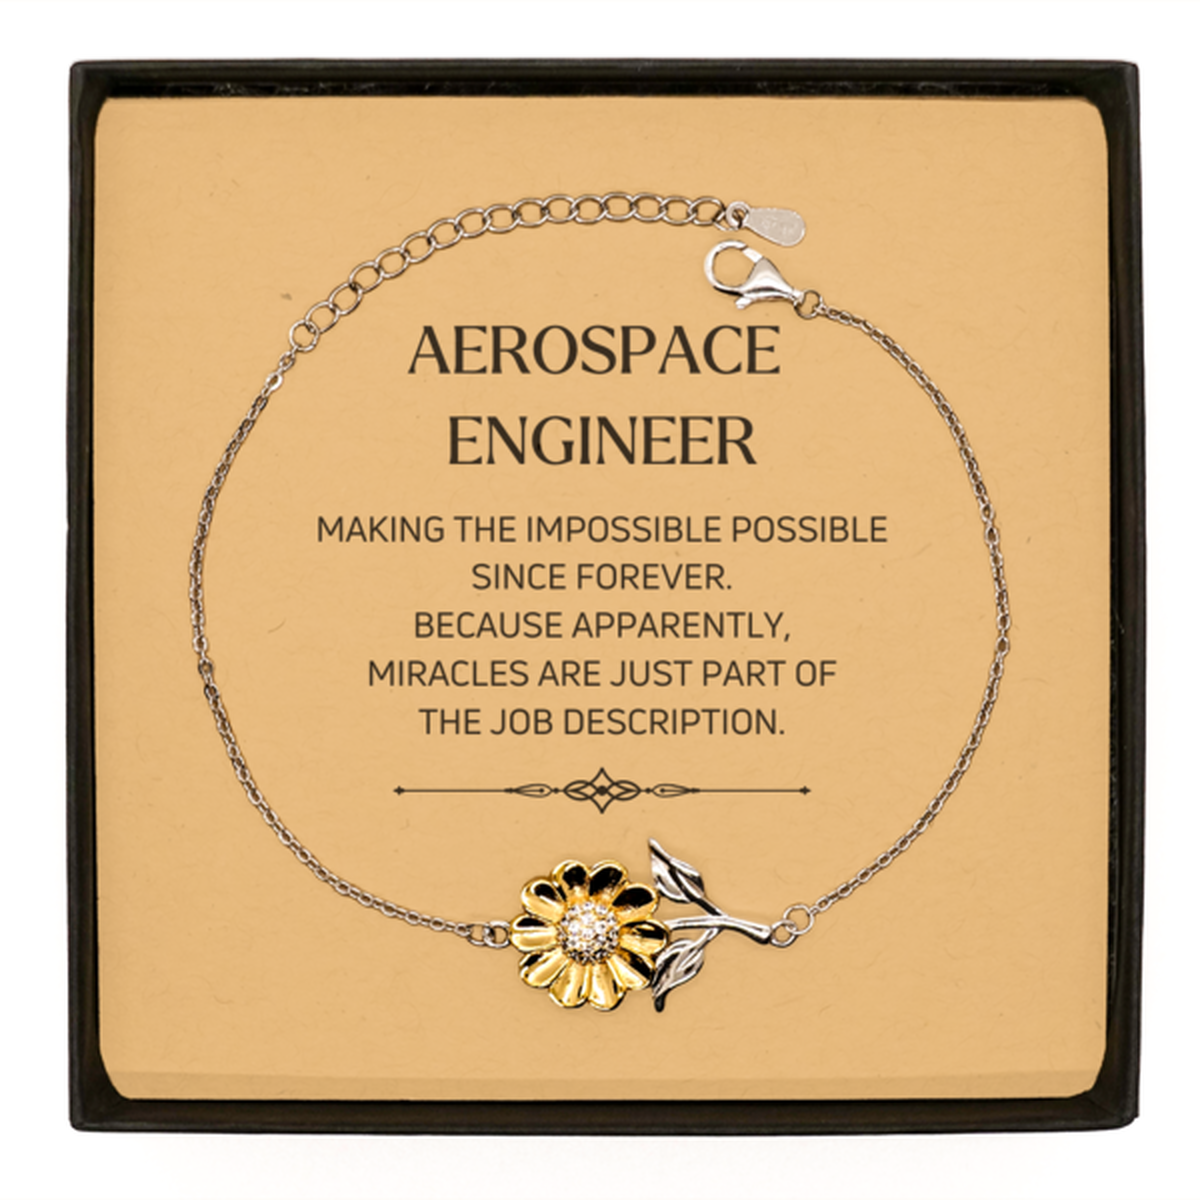 Funny Aerospace Engineer Gifts, Miracles are just part of the job description, Inspirational Birthday Sunflower Bracelet For Aerospace Engineer, Men, Women, Coworkers, Friends, Boss